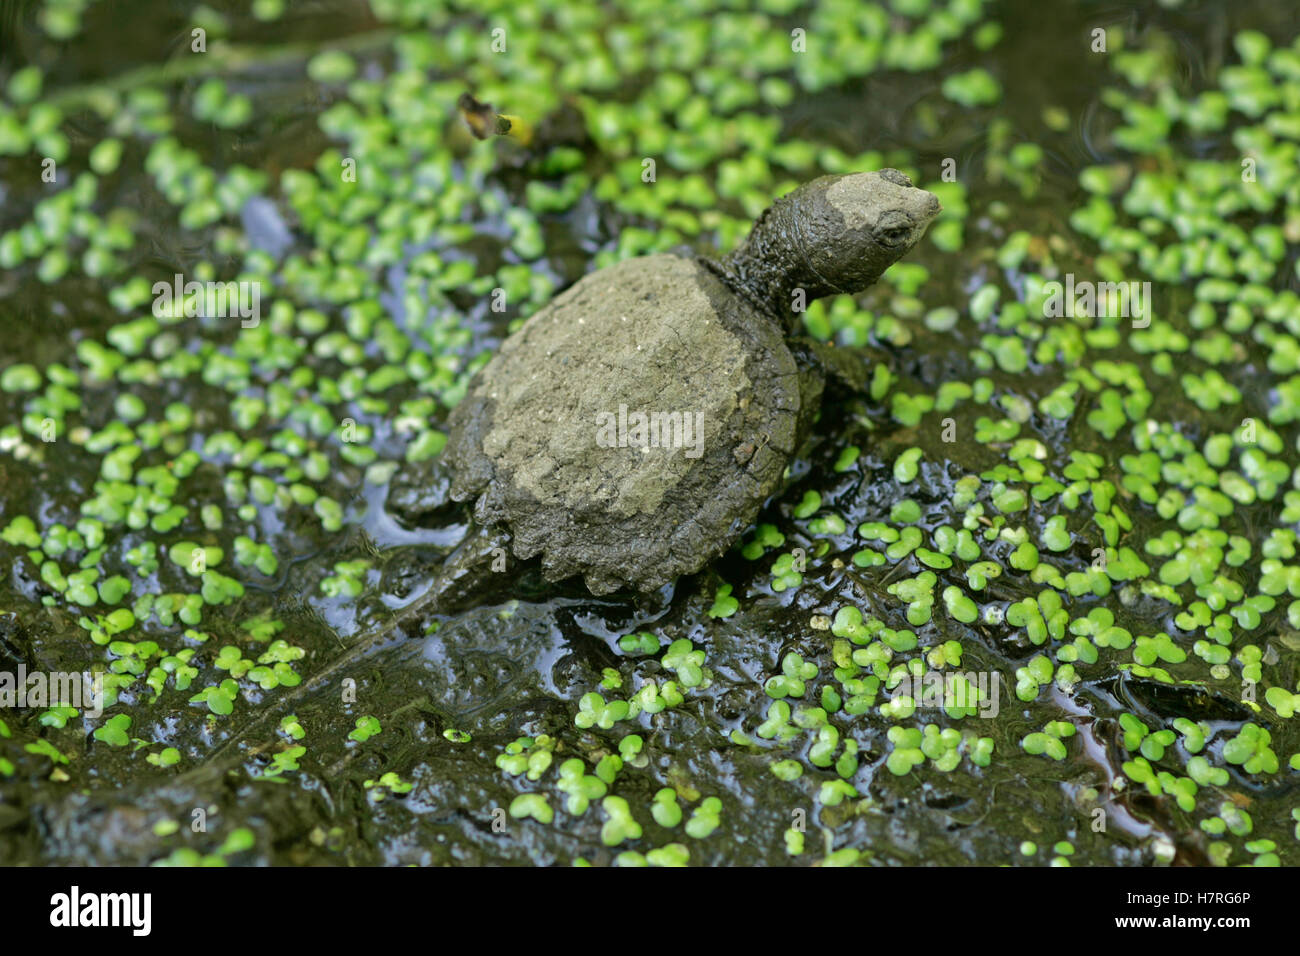 Baby Snapping Turtle Leaving The Nest Stock Photo